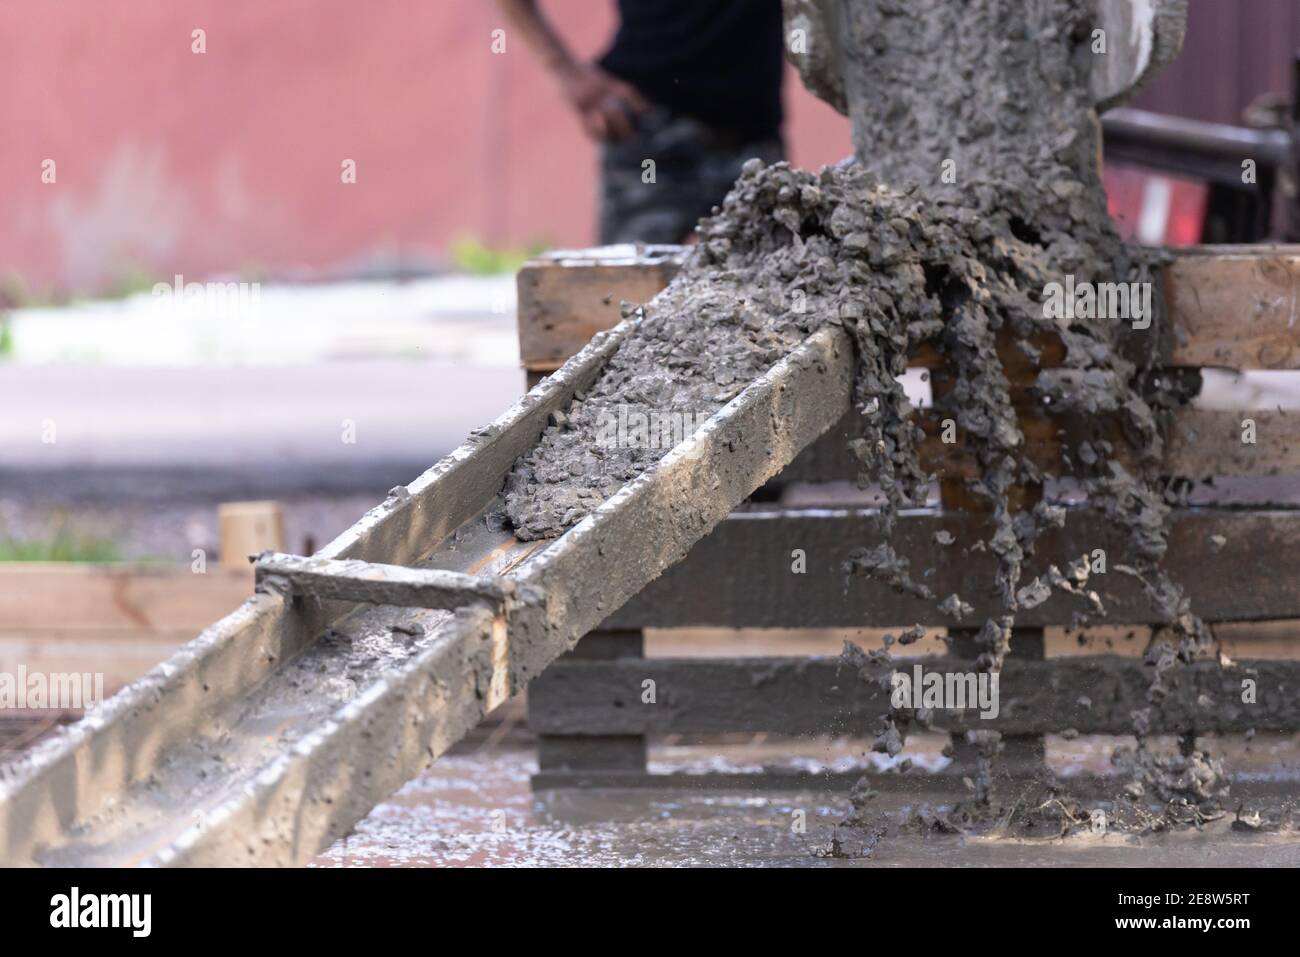 https://c8.alamy.com/comp/2E8W5RT/self-made-chute-for-concreting-works-concrete-pours-down-a-wooden-chute-2E8W5RT.jpg